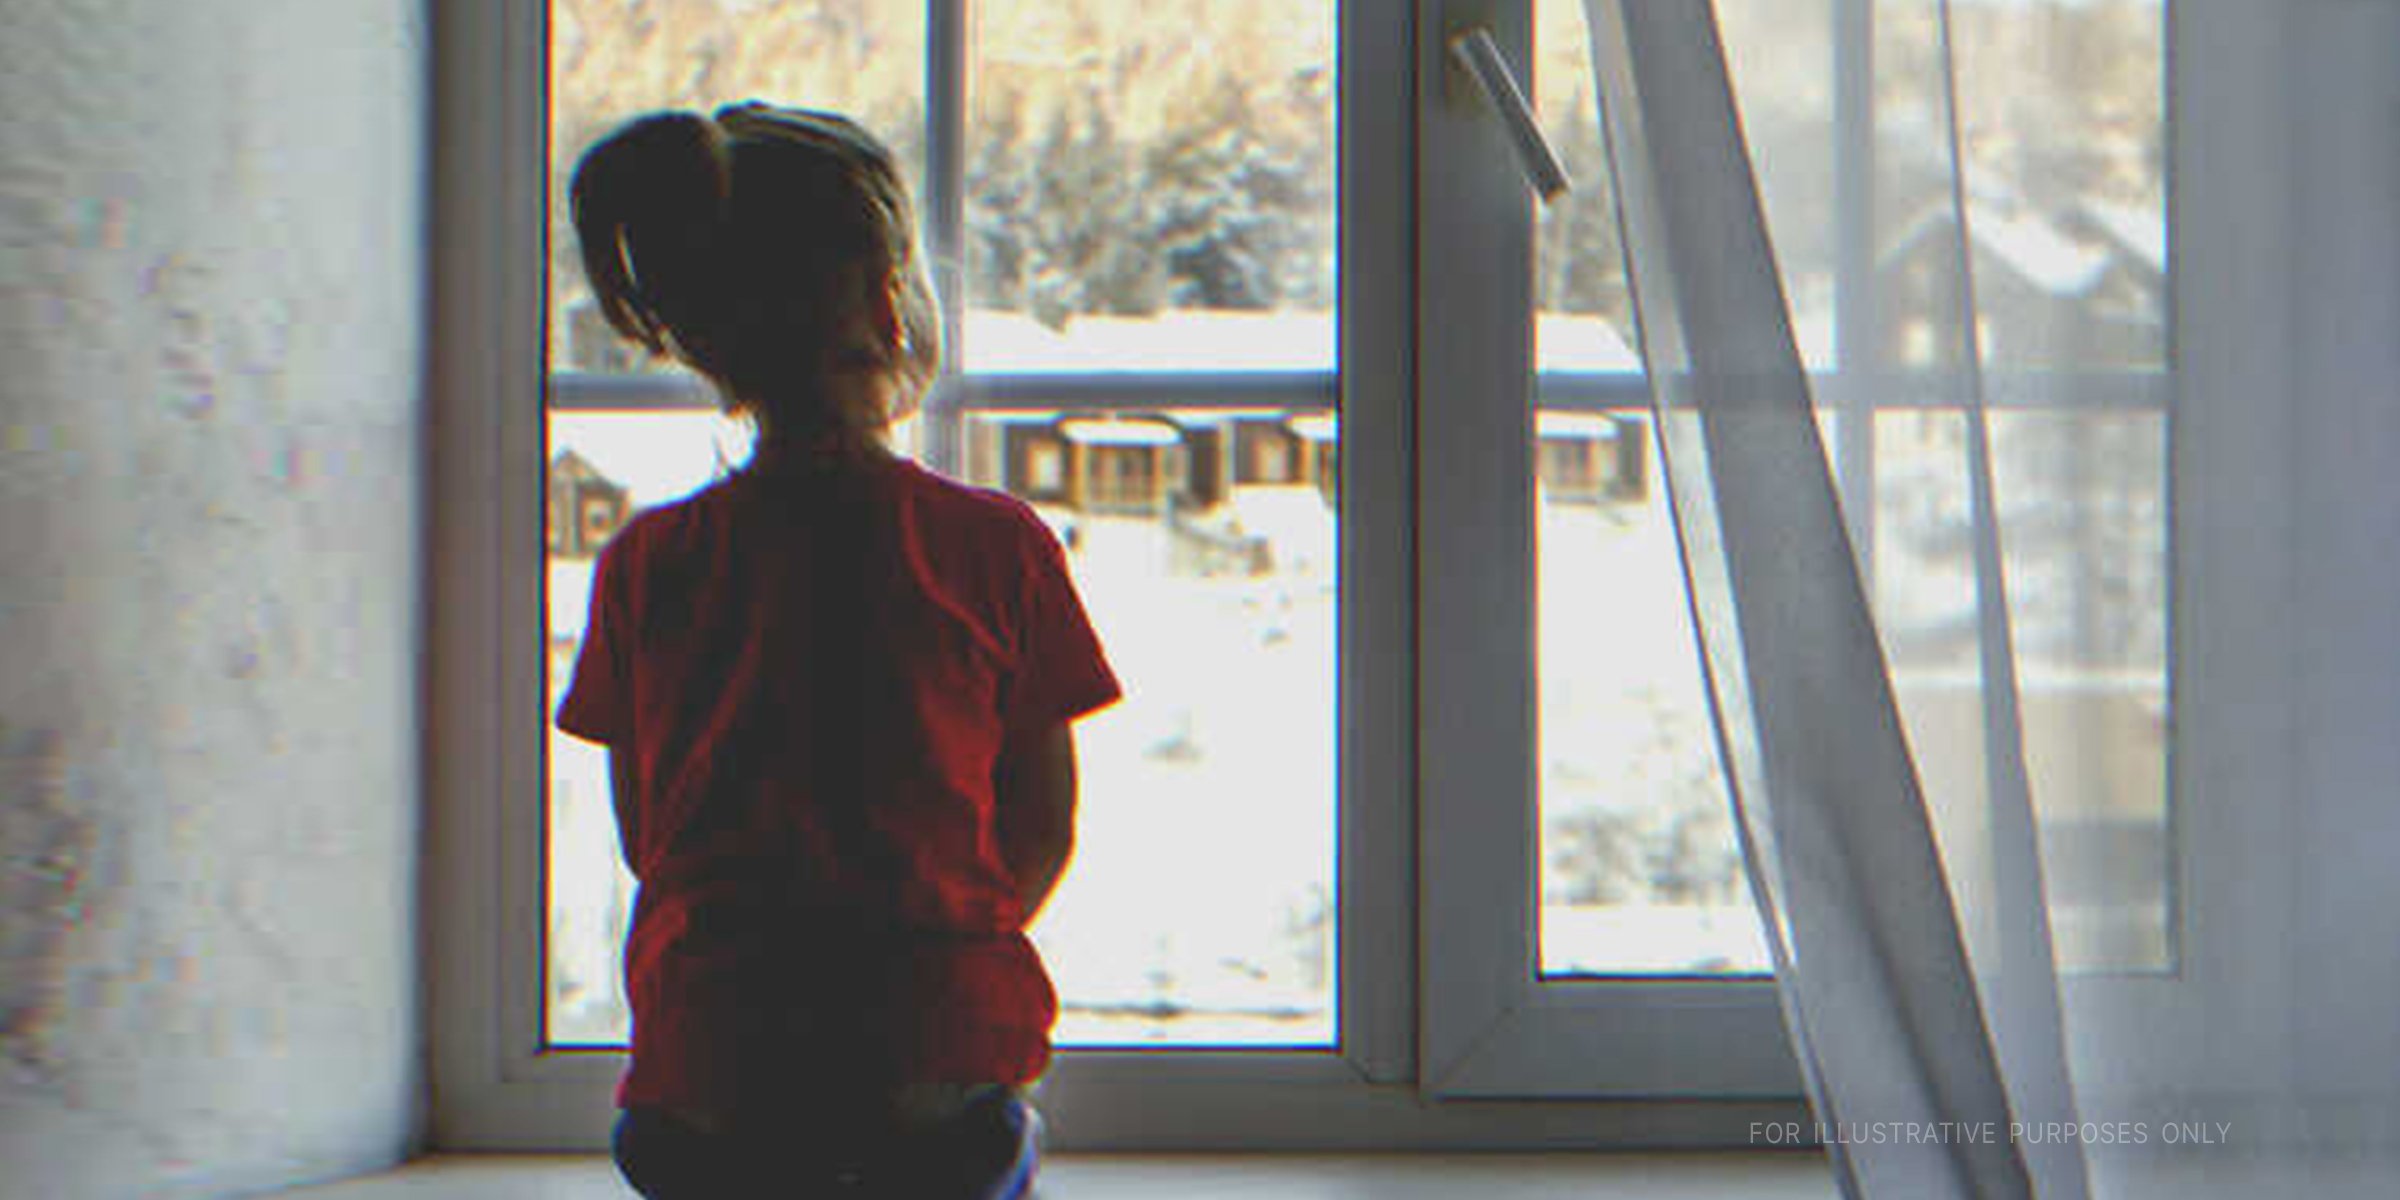 A girl staring out a window. | Source: Shutterstock